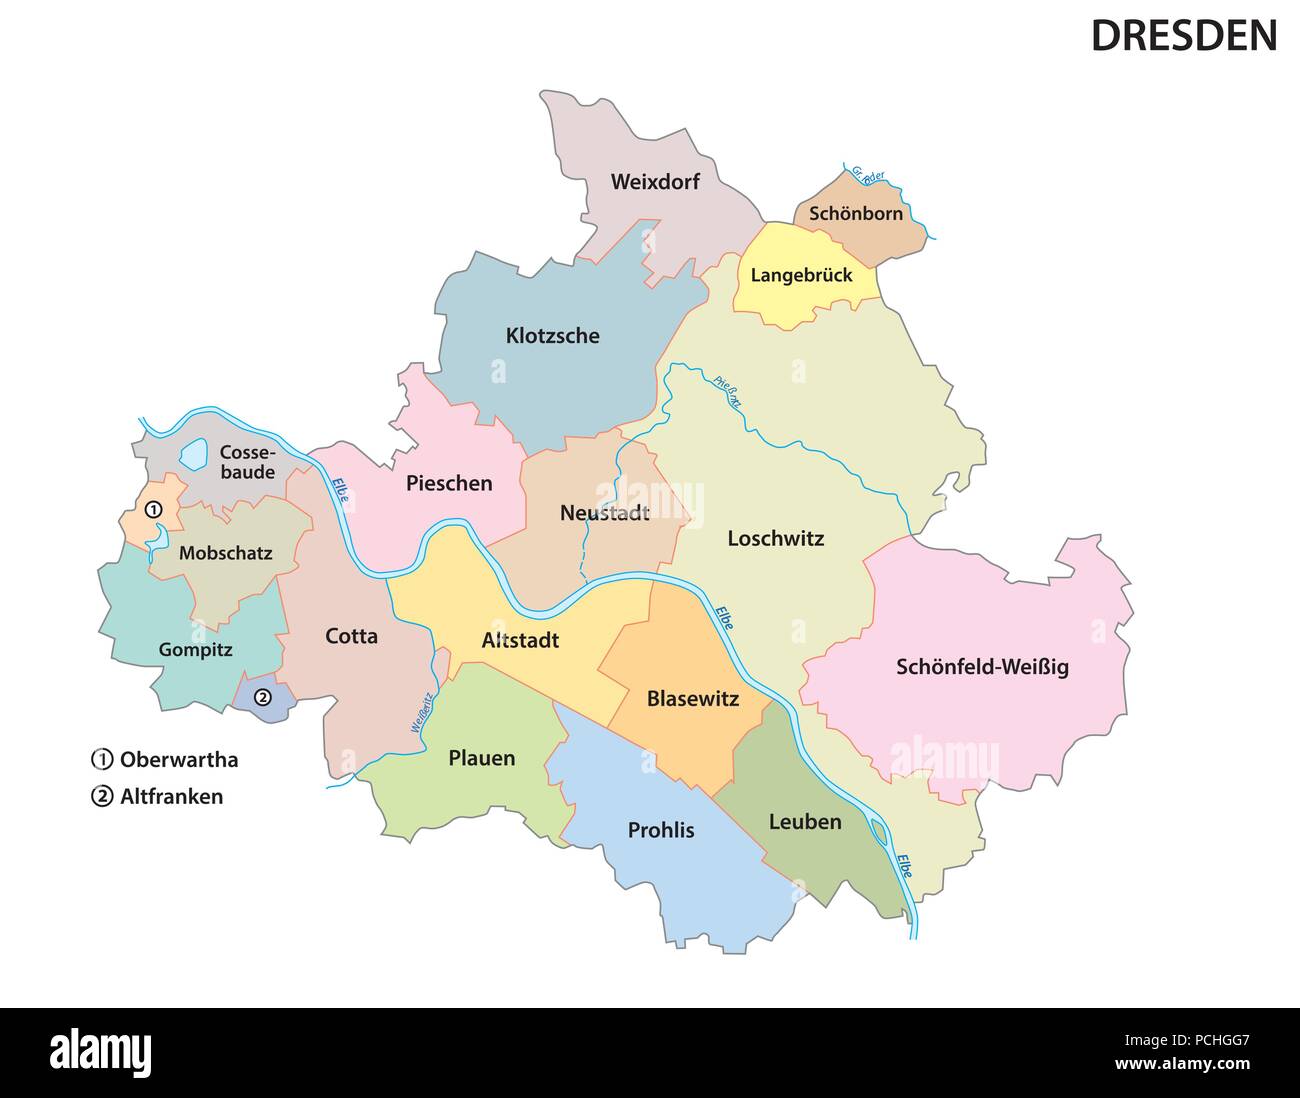 Dresden, administrative and political map of the Saxon capital. Stock Vector